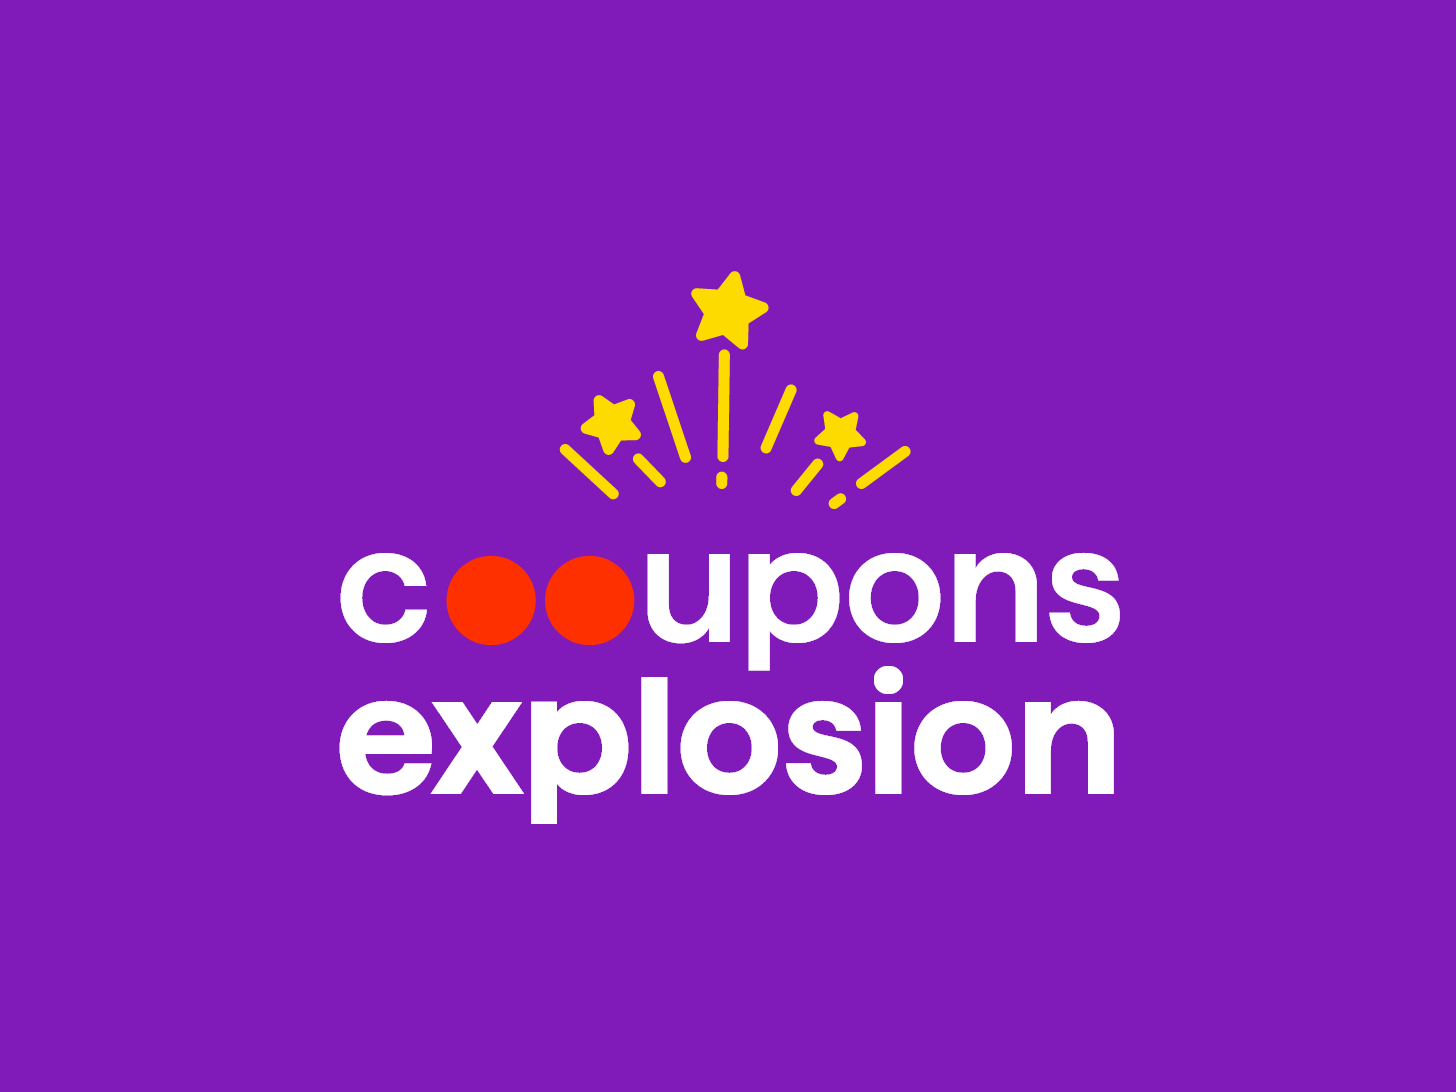 Coupons explosion